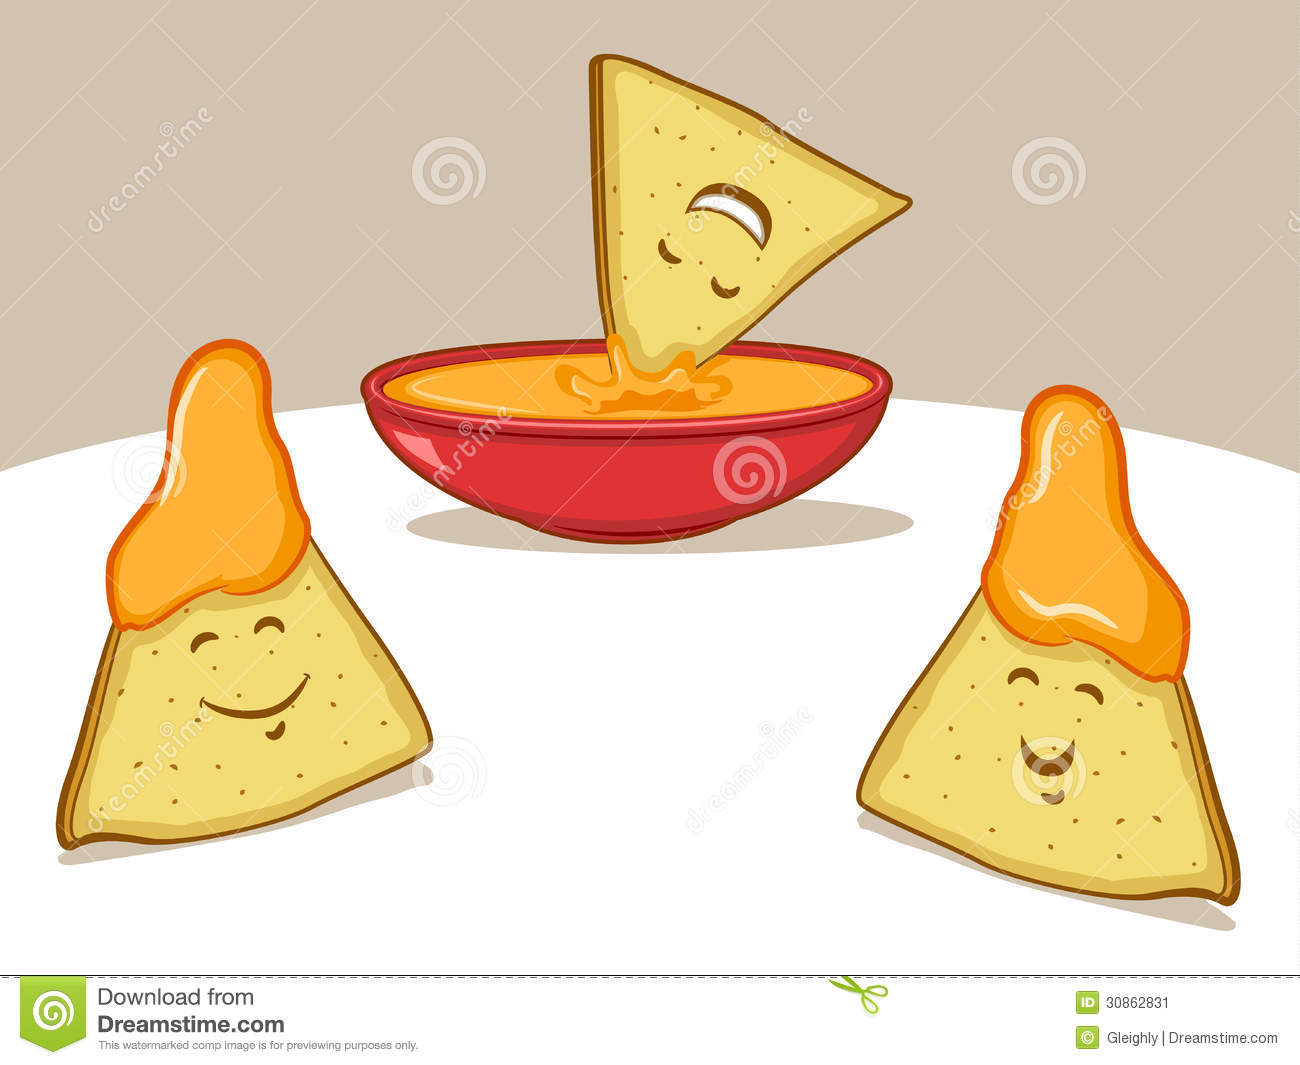 Illustration Of Smiling Tortilla Chips And Dip